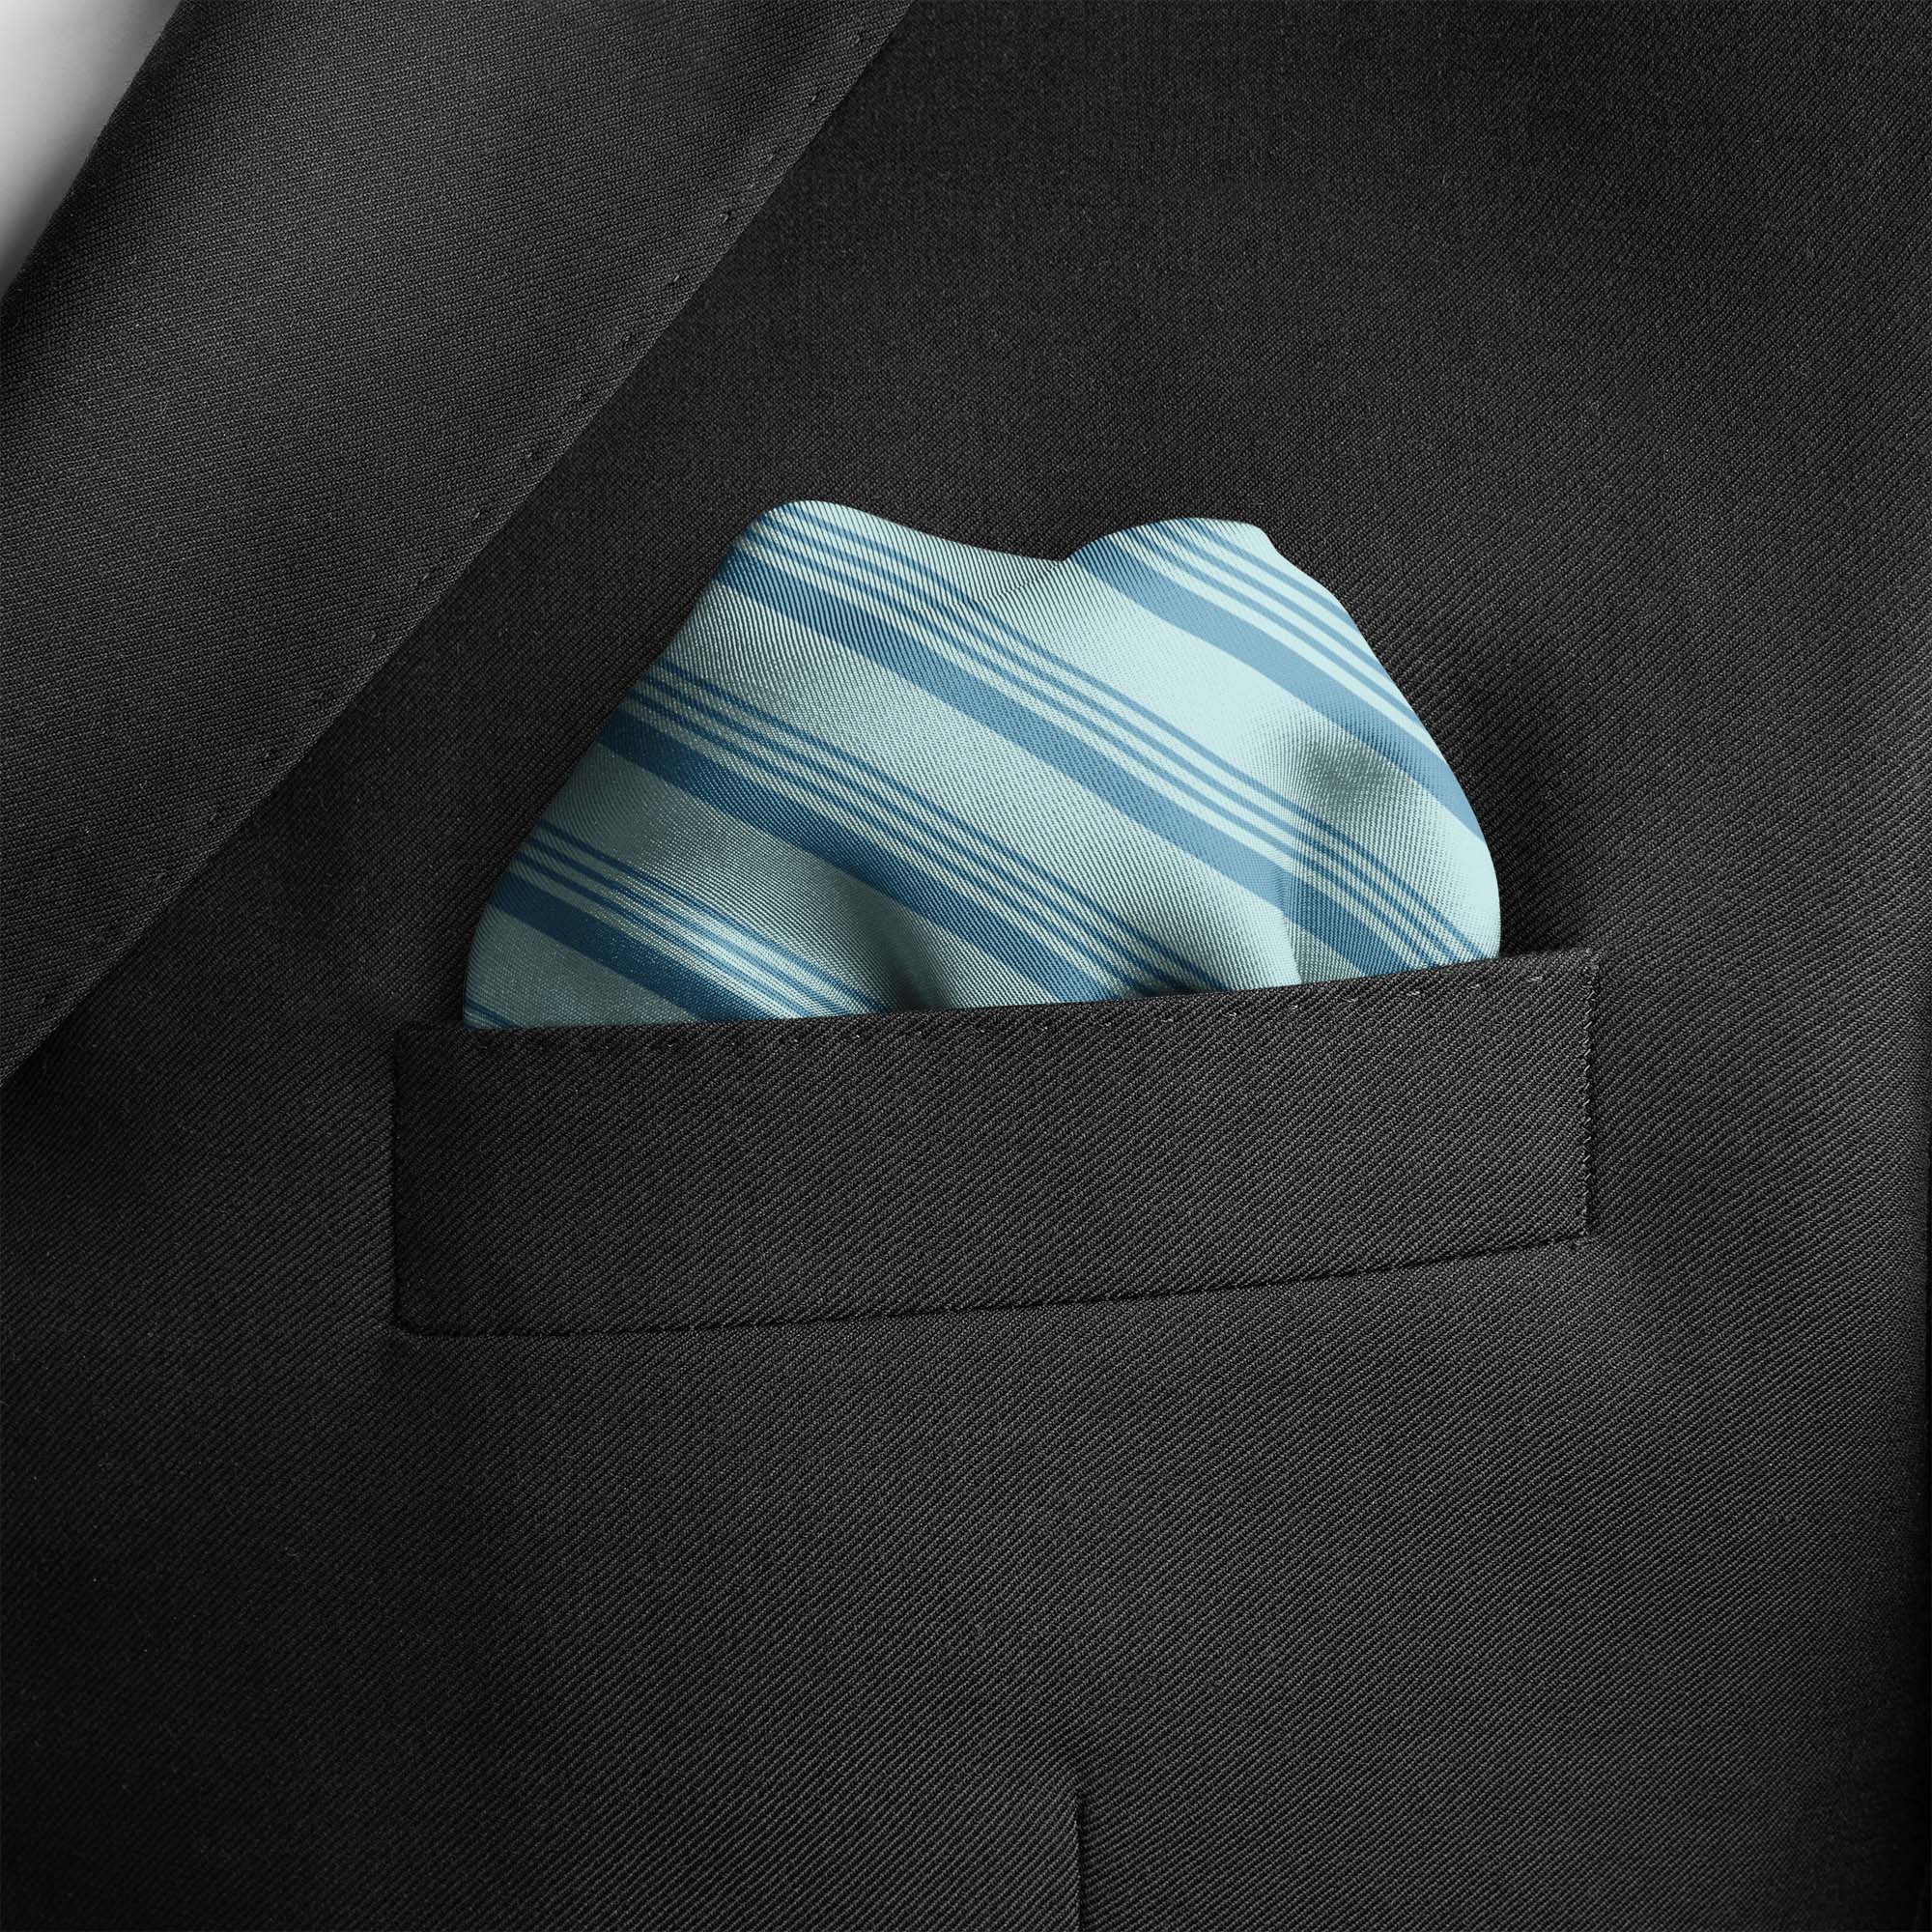 FOUR IN ONE PASTEL ICE BLUE SILK POCKET SQUARE